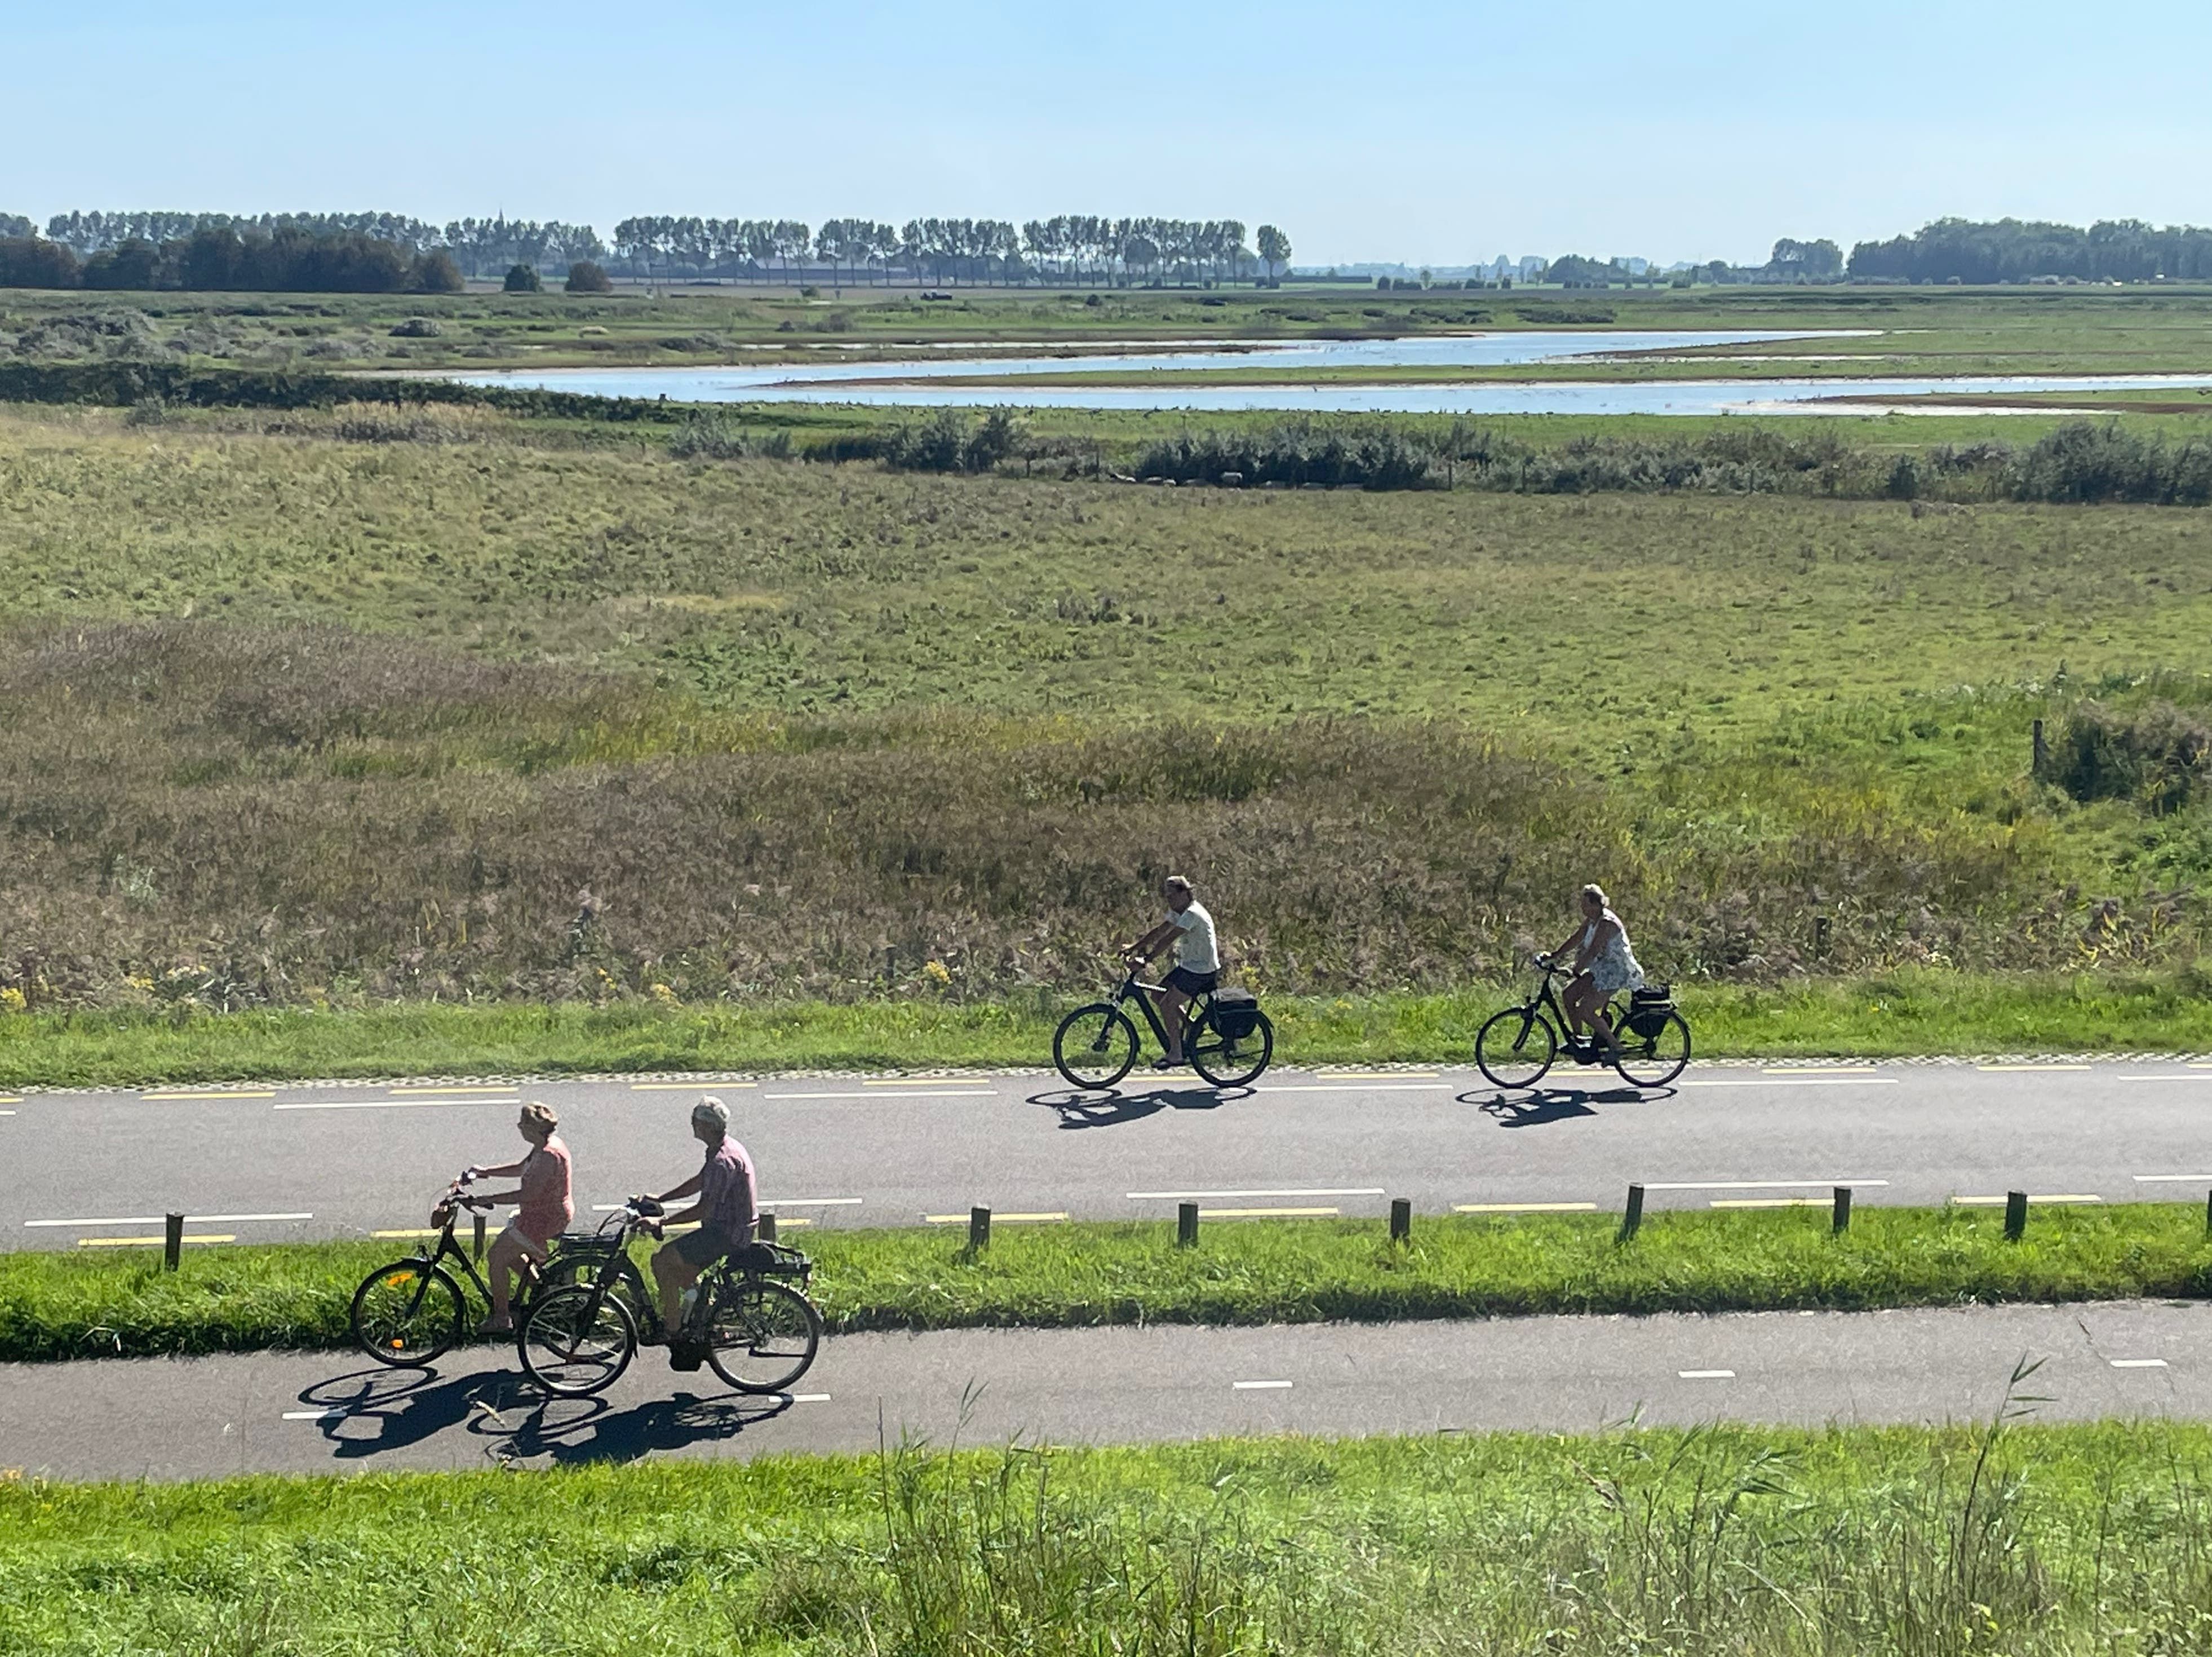 <p>Taking the low road: Flat routes make this Dutch region a joy for relaxed cycling</p>